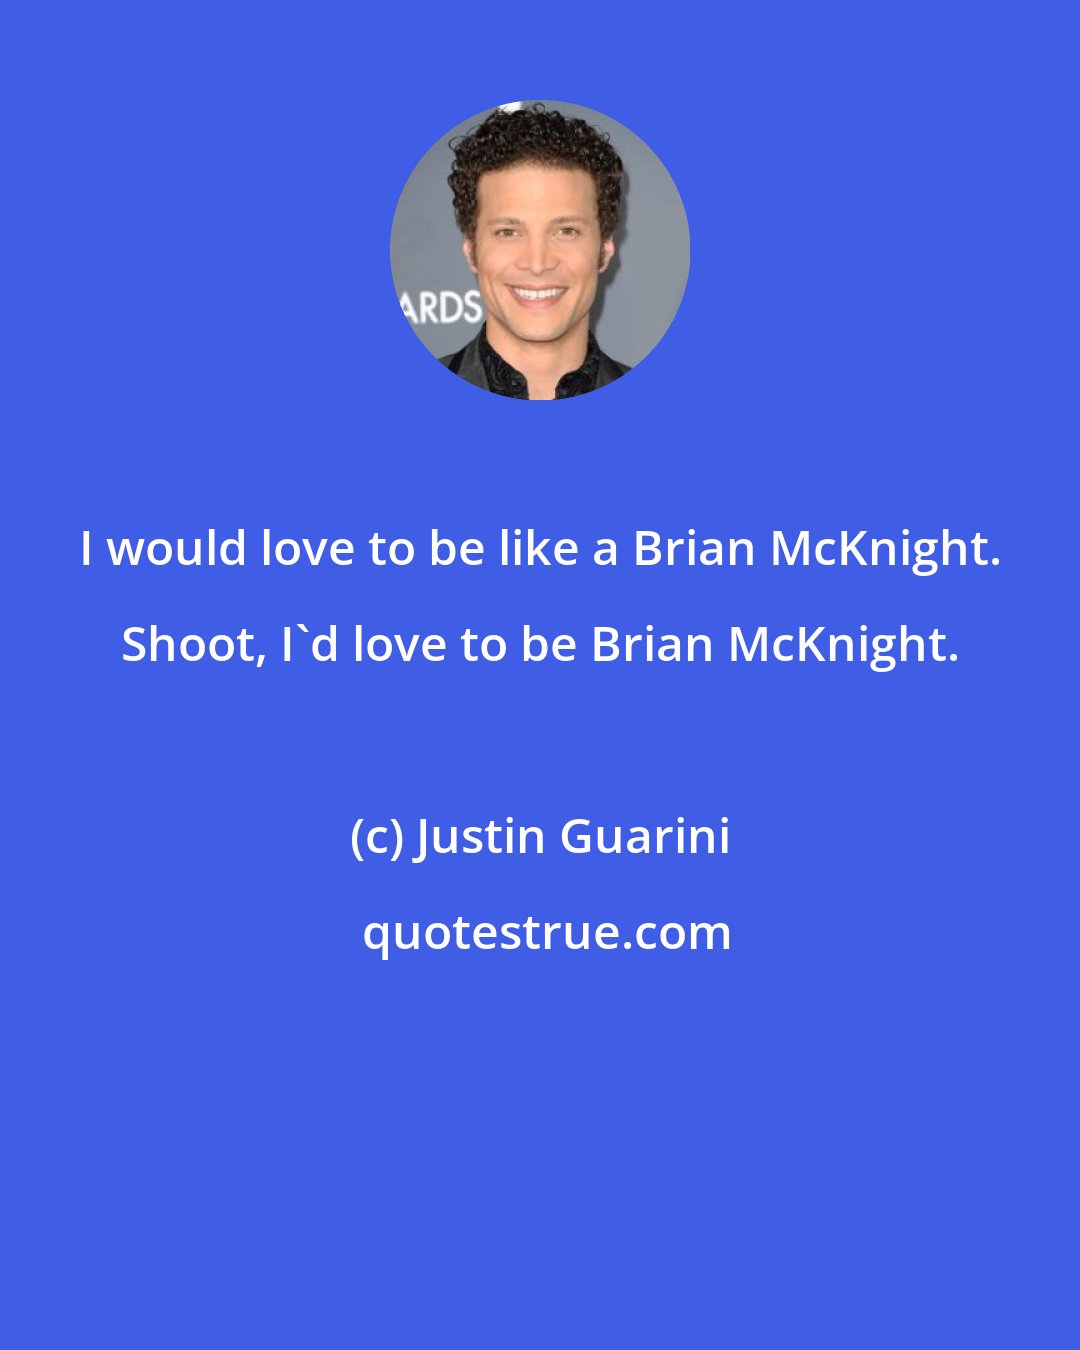 Justin Guarini: I would love to be like a Brian McKnight. Shoot, I'd love to be Brian McKnight.